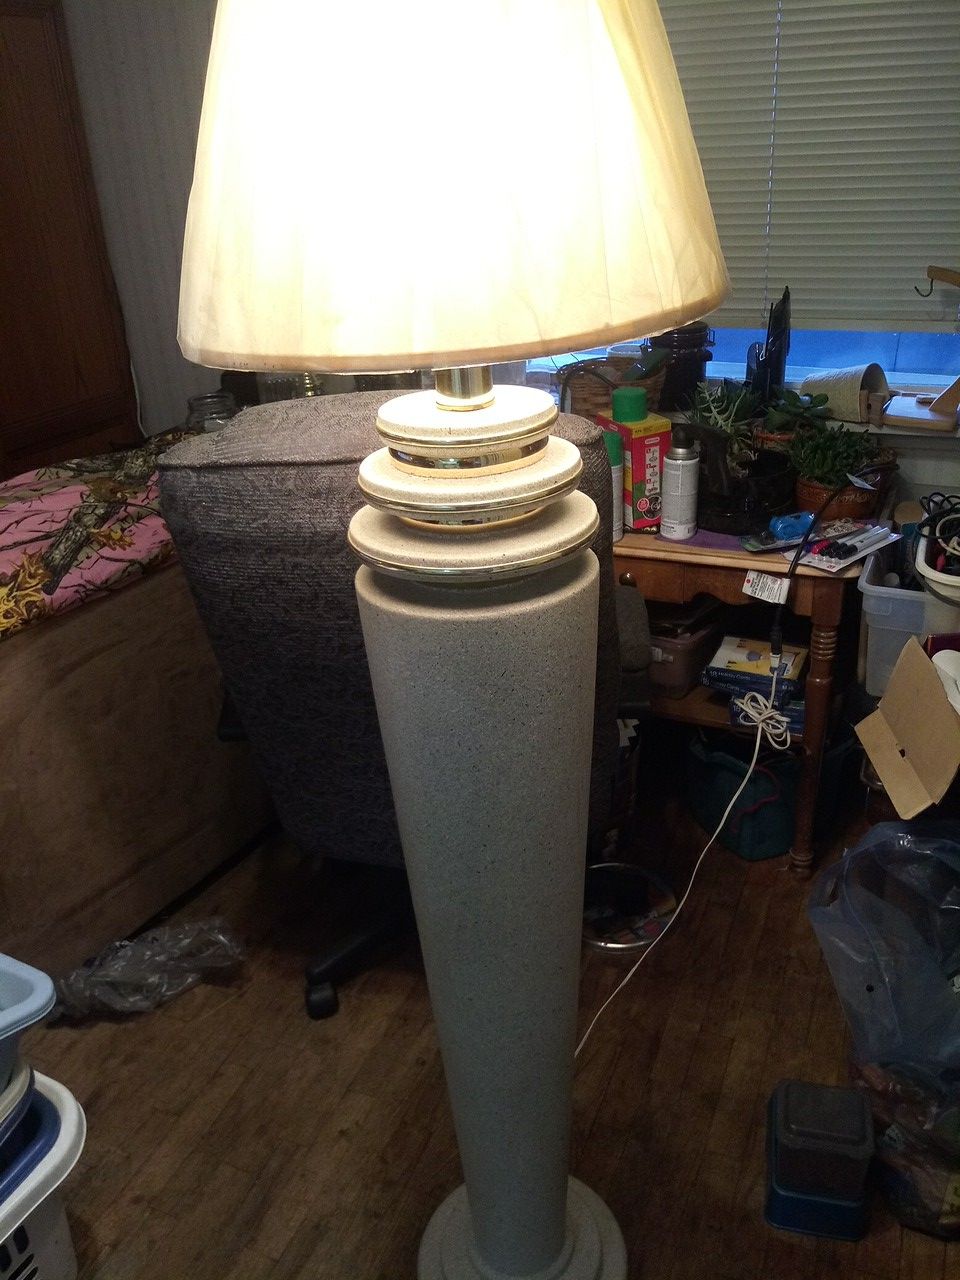 Thick heavy ceramic with brass Rings three way light switch 5 1/2 foot tall lamp with shade on.